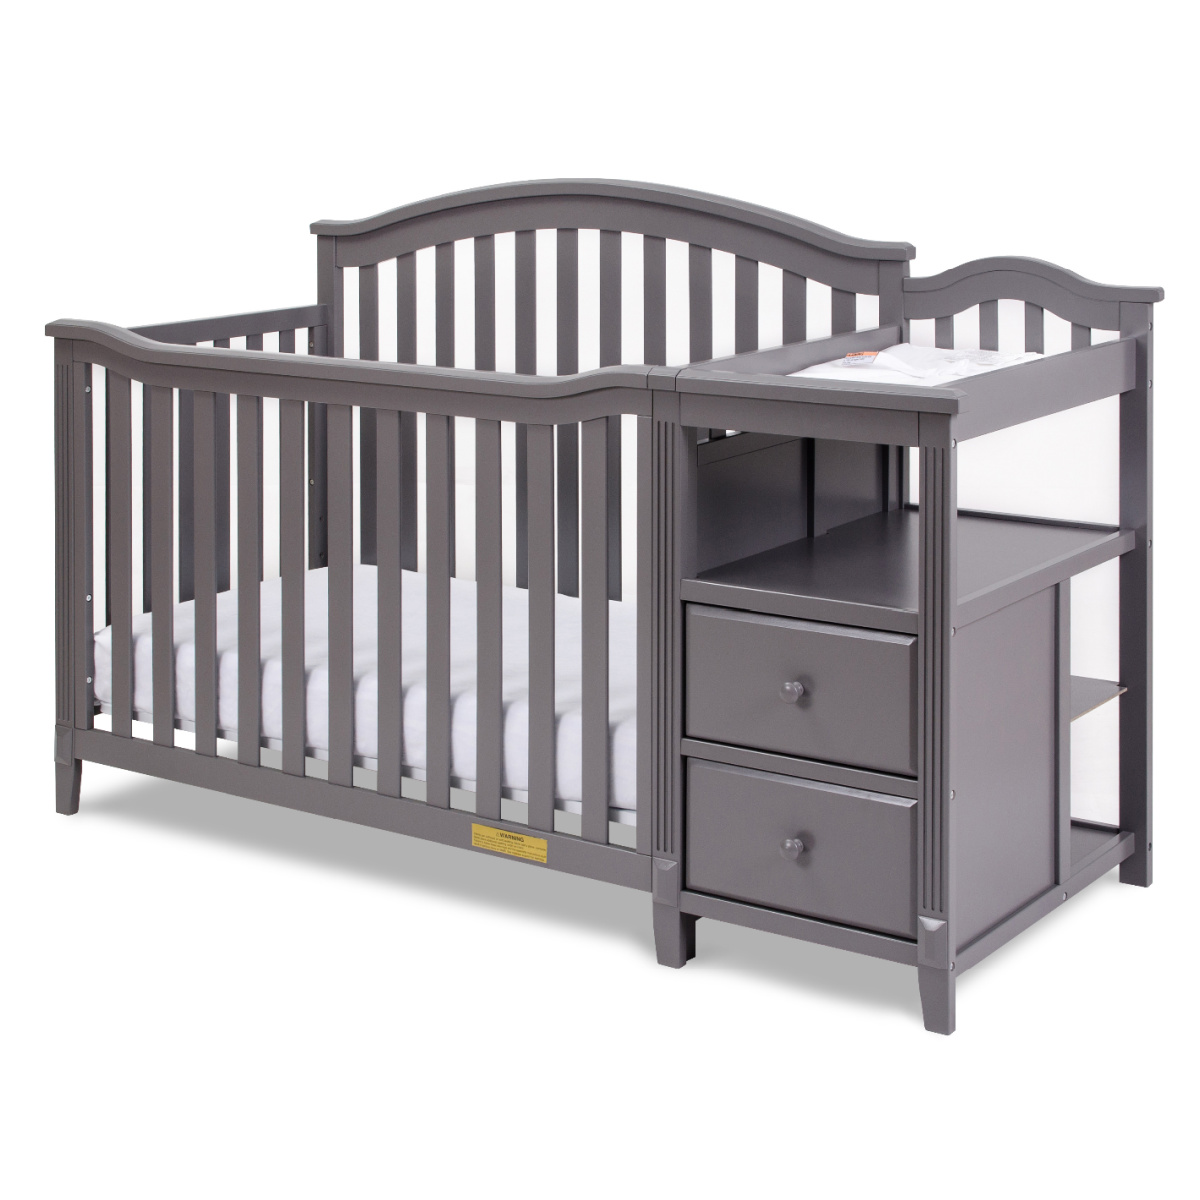 Athena Kali 4-in-1 Convertible Crib and Changer